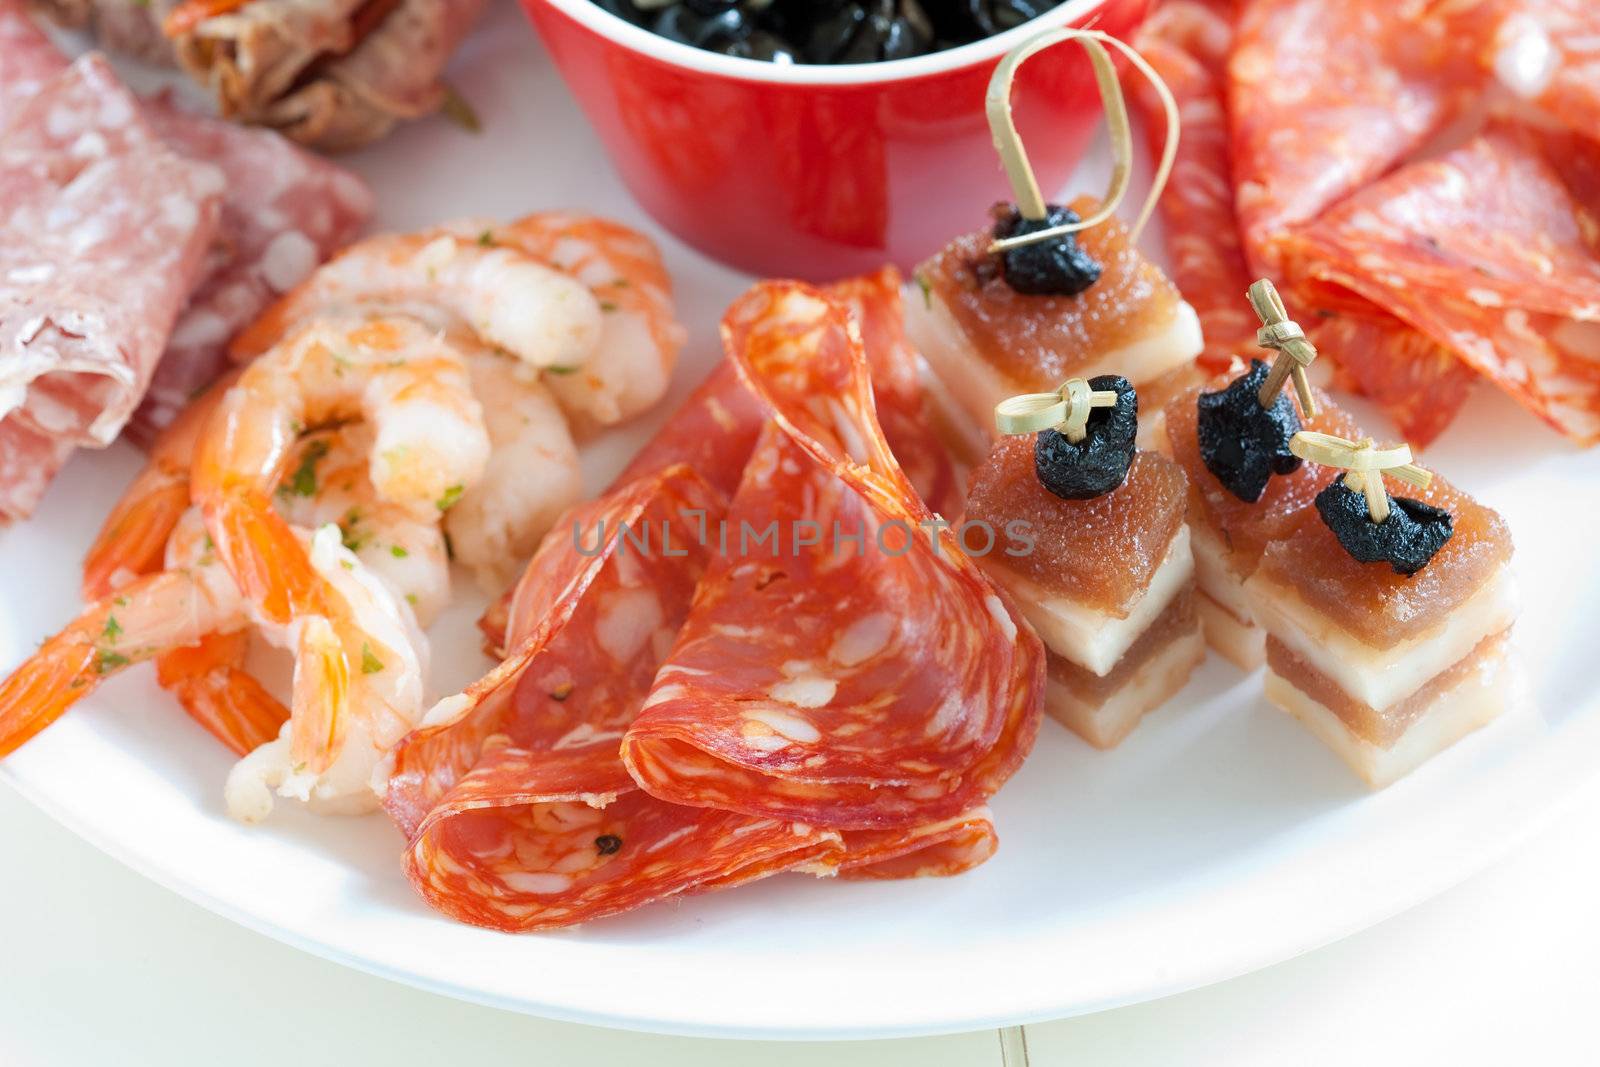 Delicious plate with antipasti snacks such as chorizo and shrimps